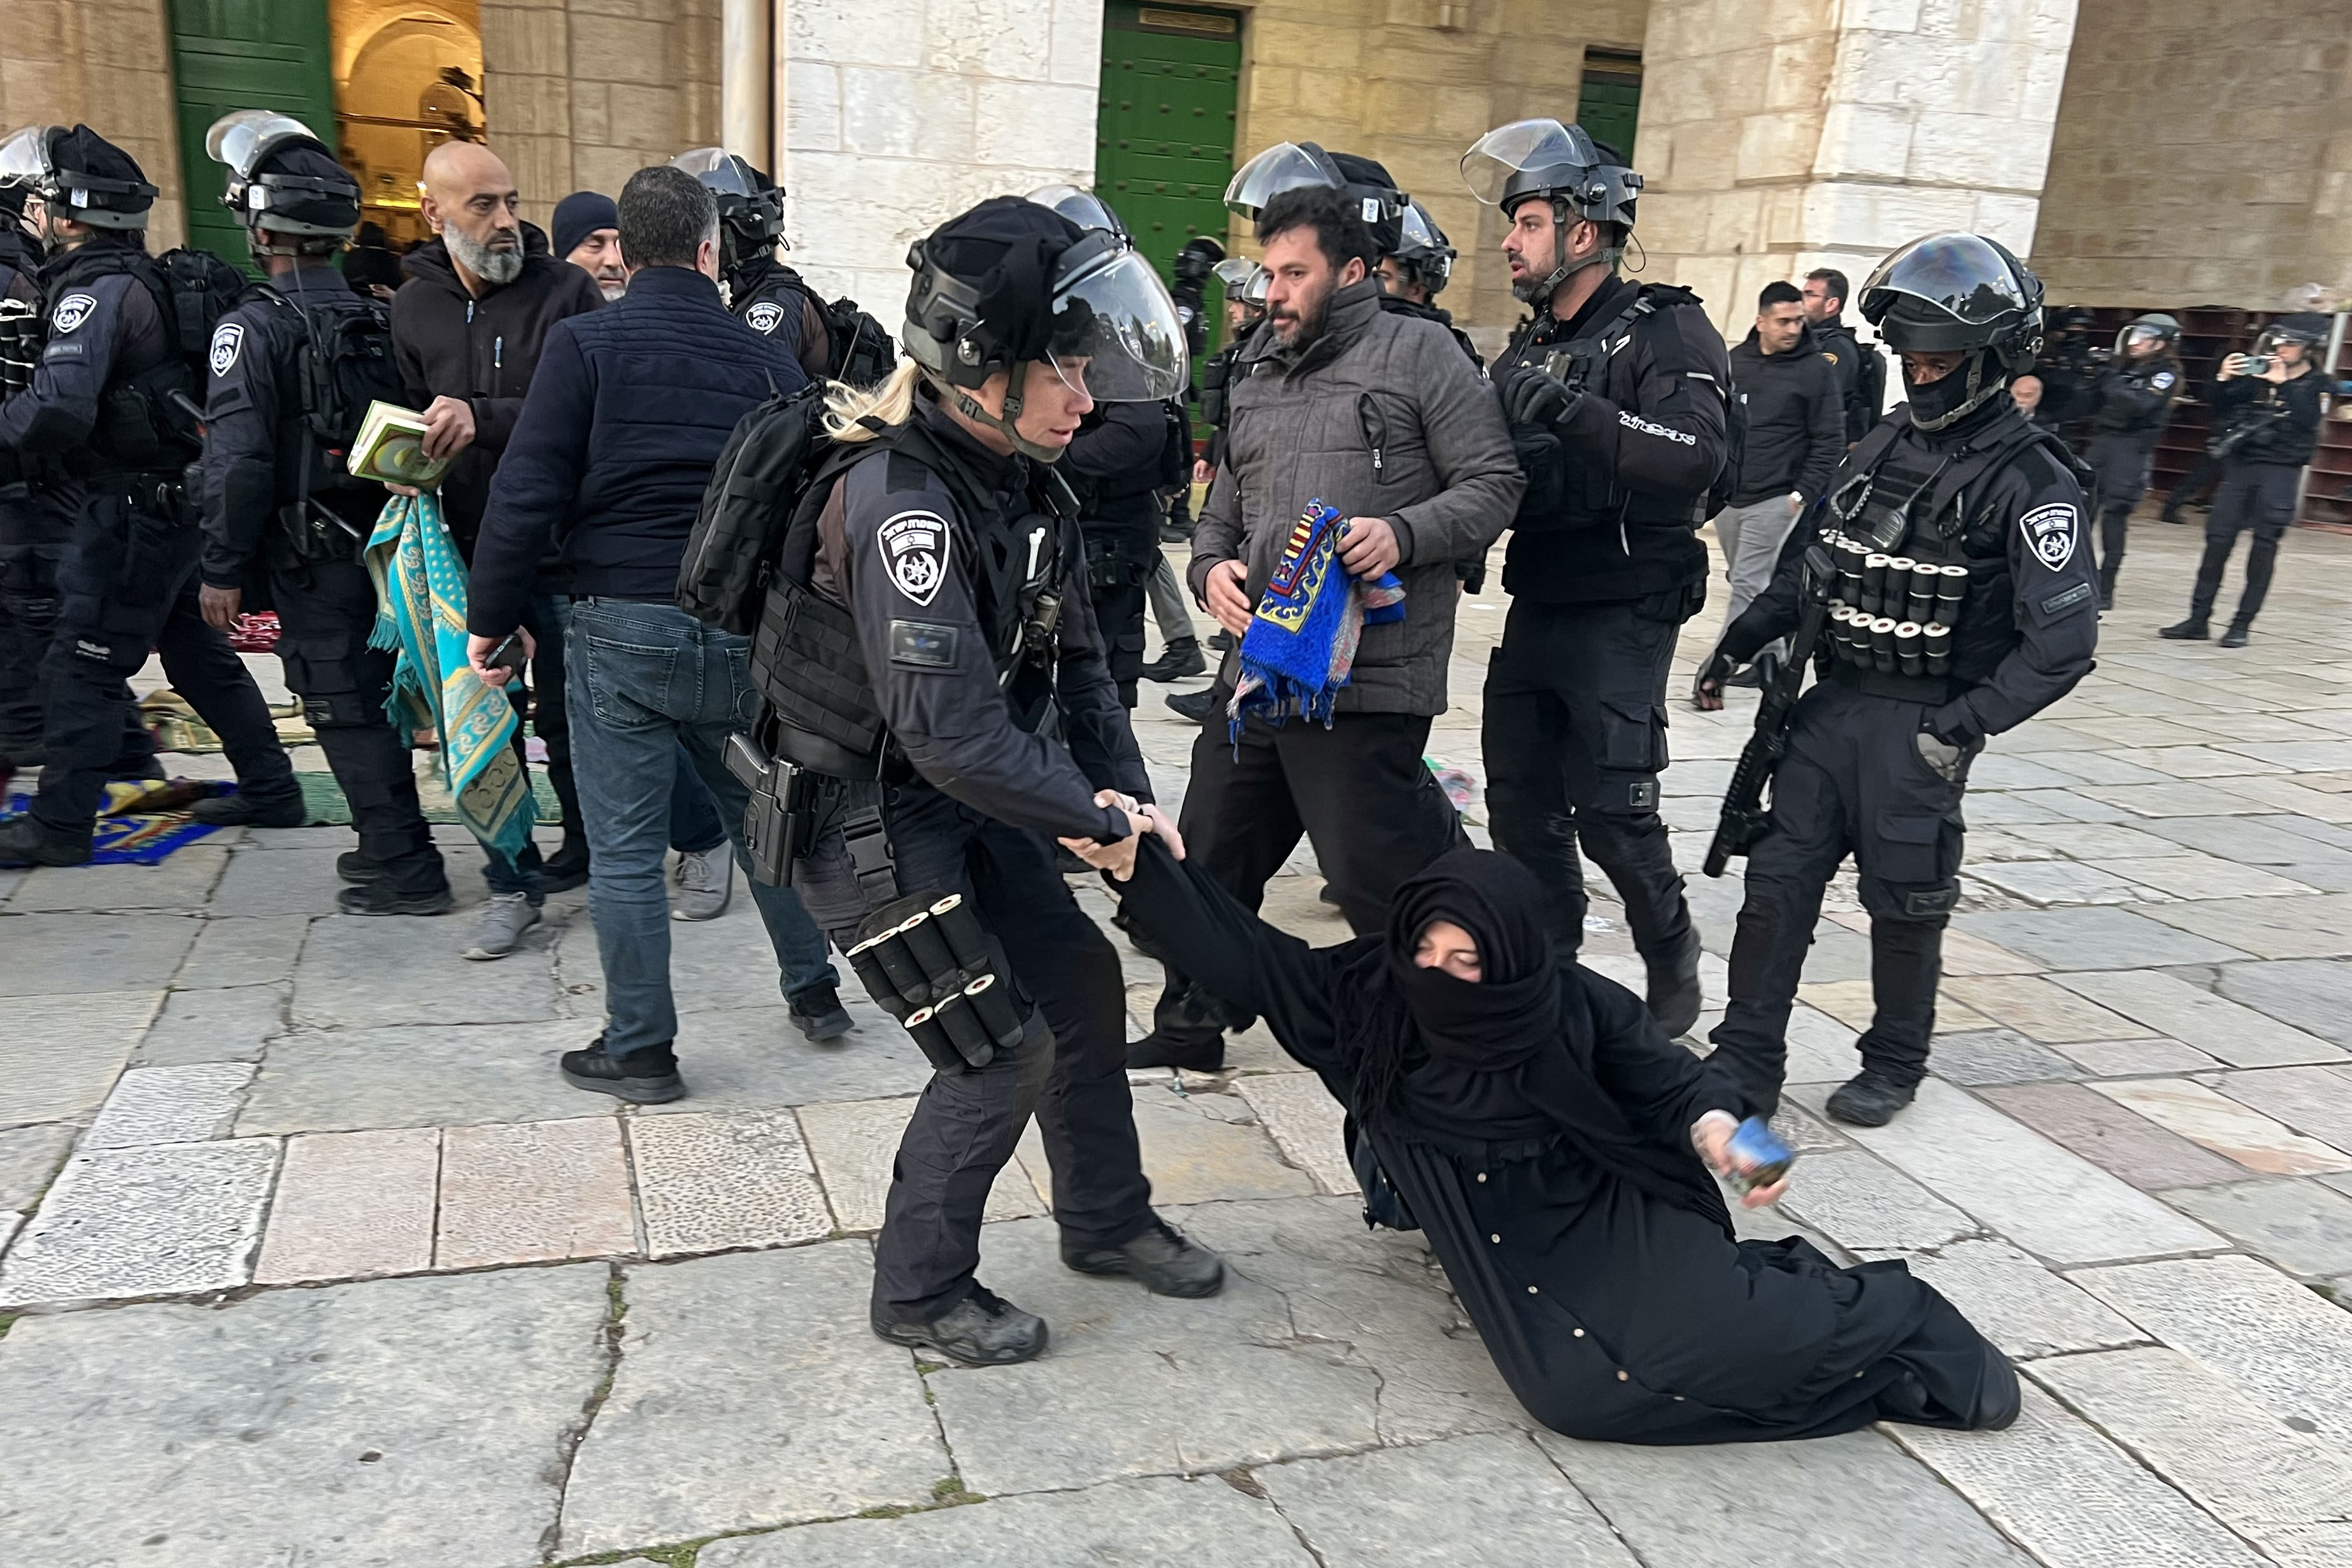 Israeli security forces remove Palestinian Muslim worshippers sitting on the grounds of the Al-Aqsa mosque compound in Jerusalem on April 5, 2023 during Islam’s holy month of Ramadan. Photo: AFP